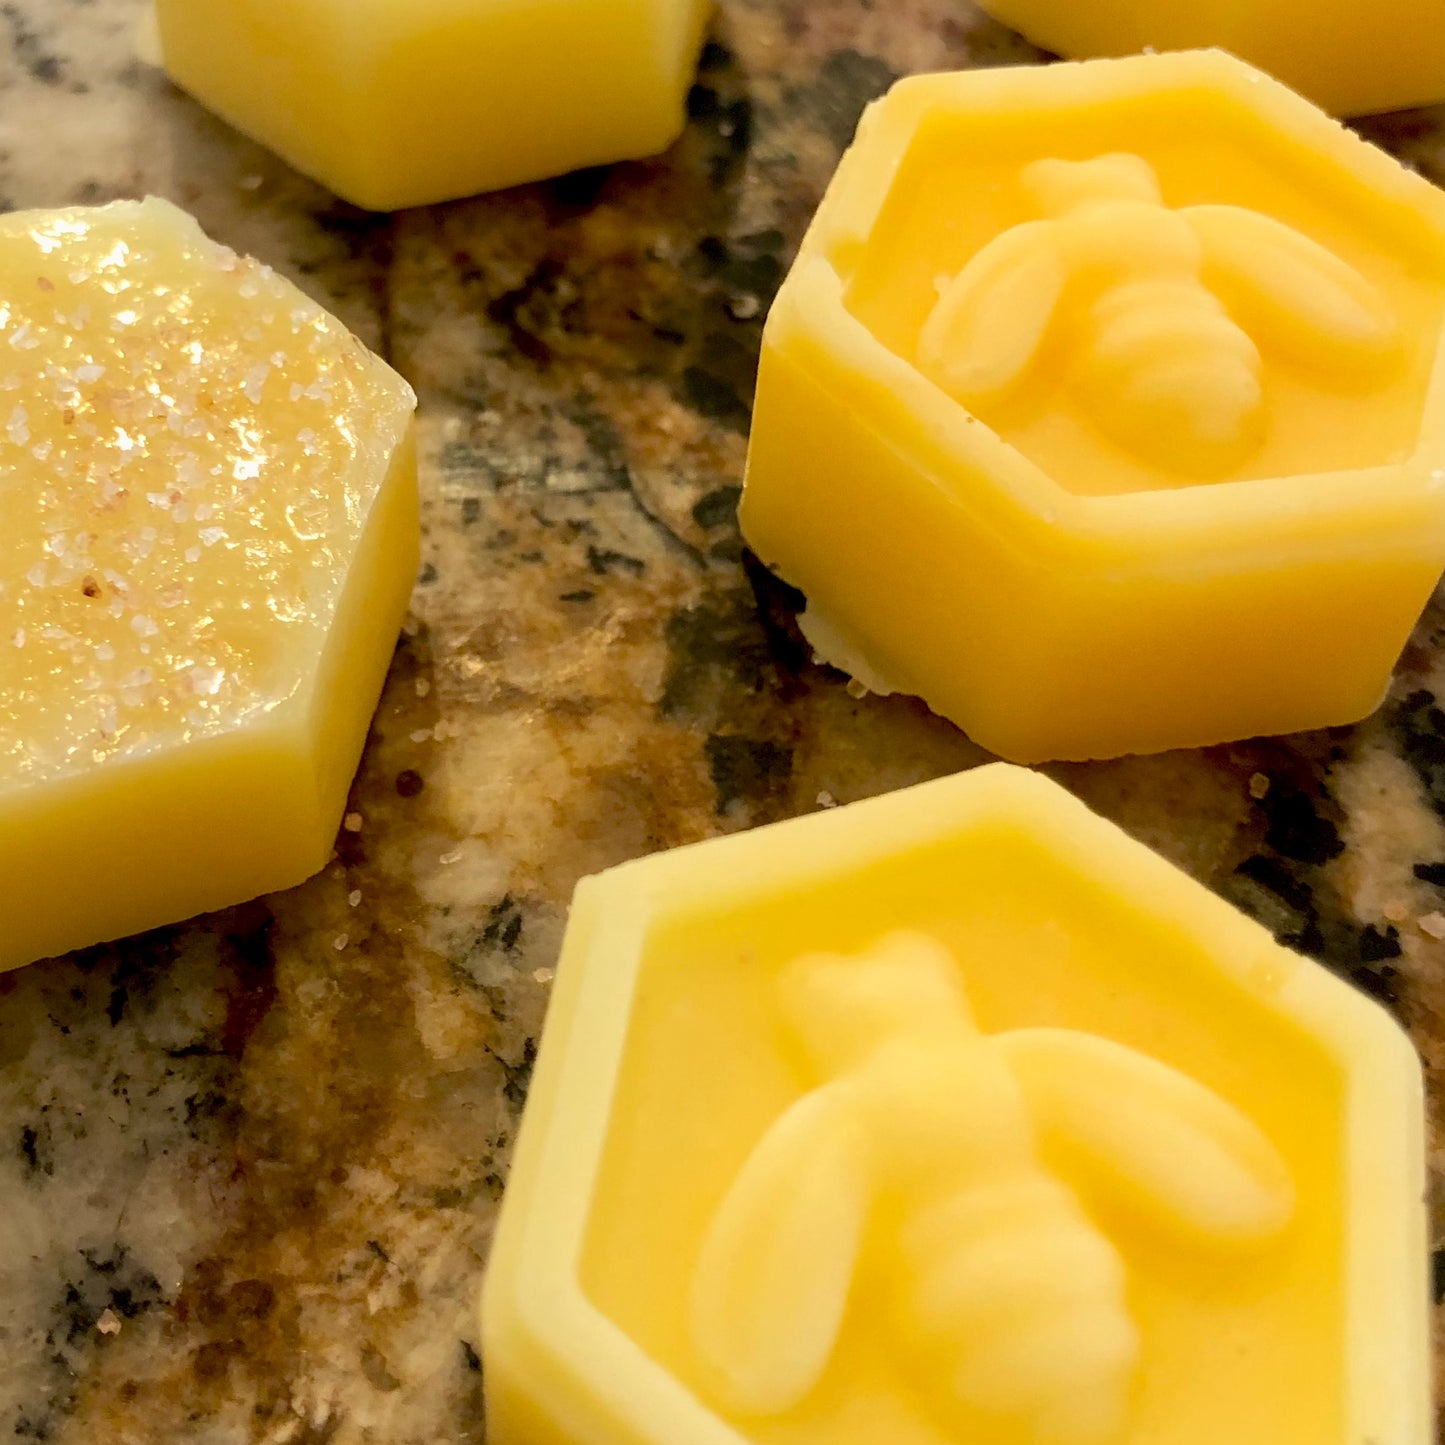 Handmade personal soap - Day at the Spa